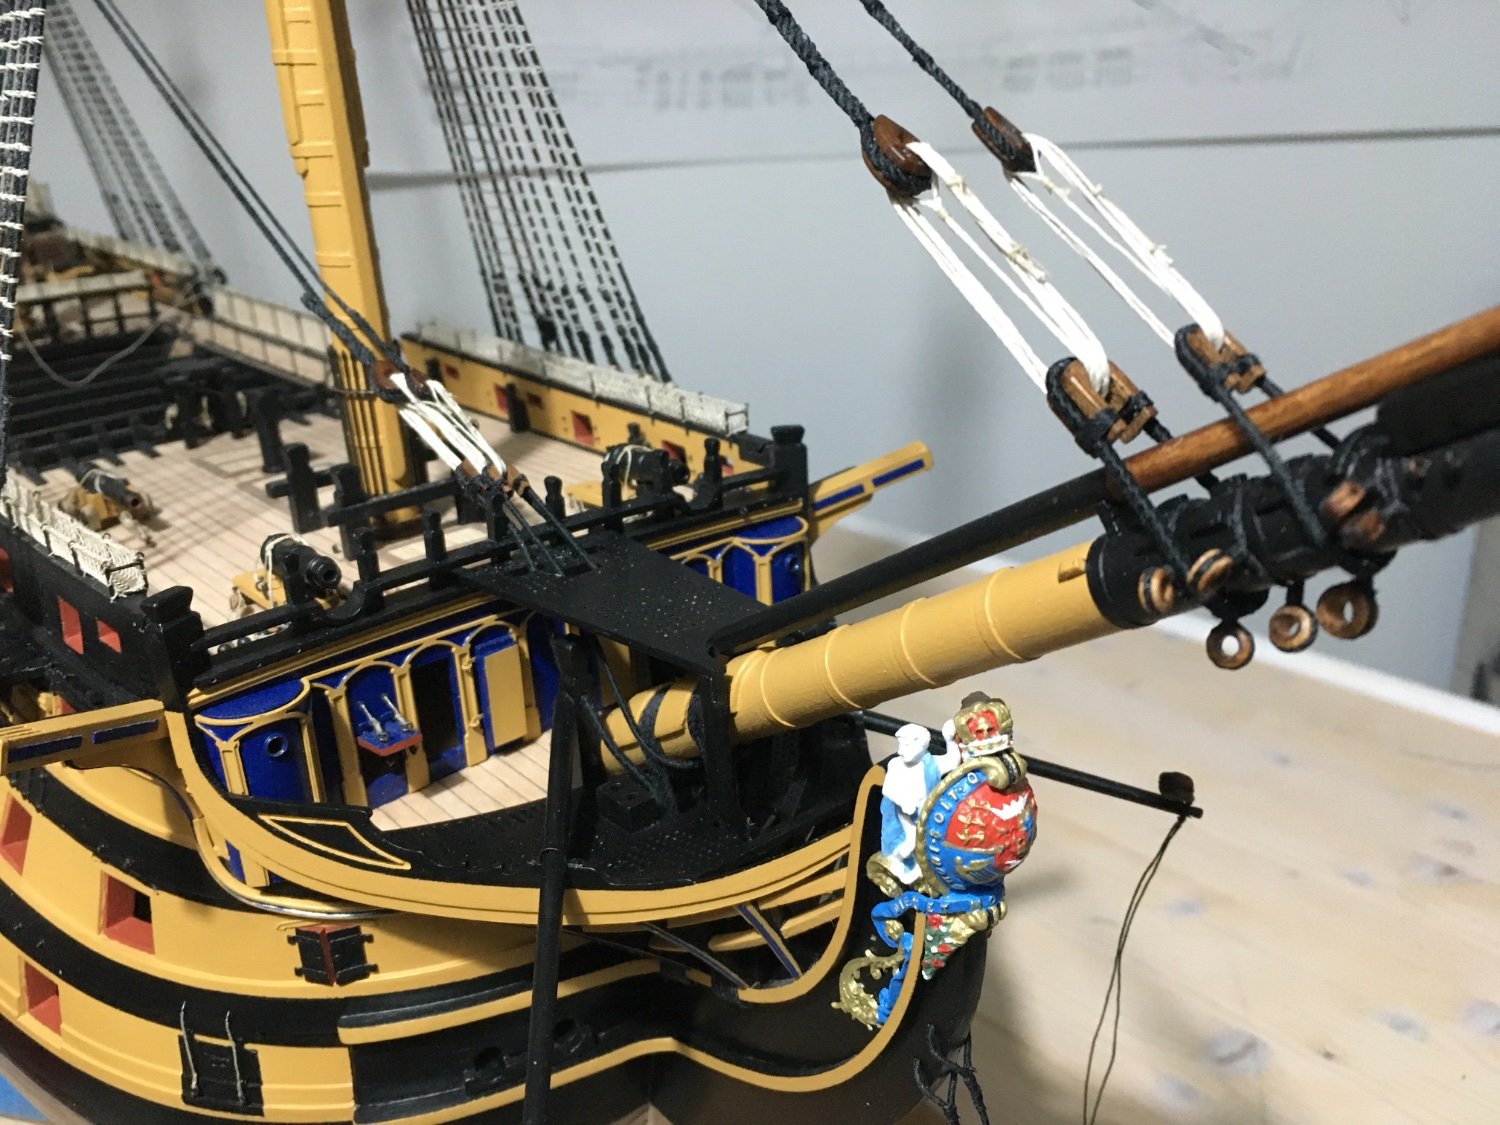 HMS Victory 1805 by Robert29 - FINISHED - Caldercraft - Scale 1:72